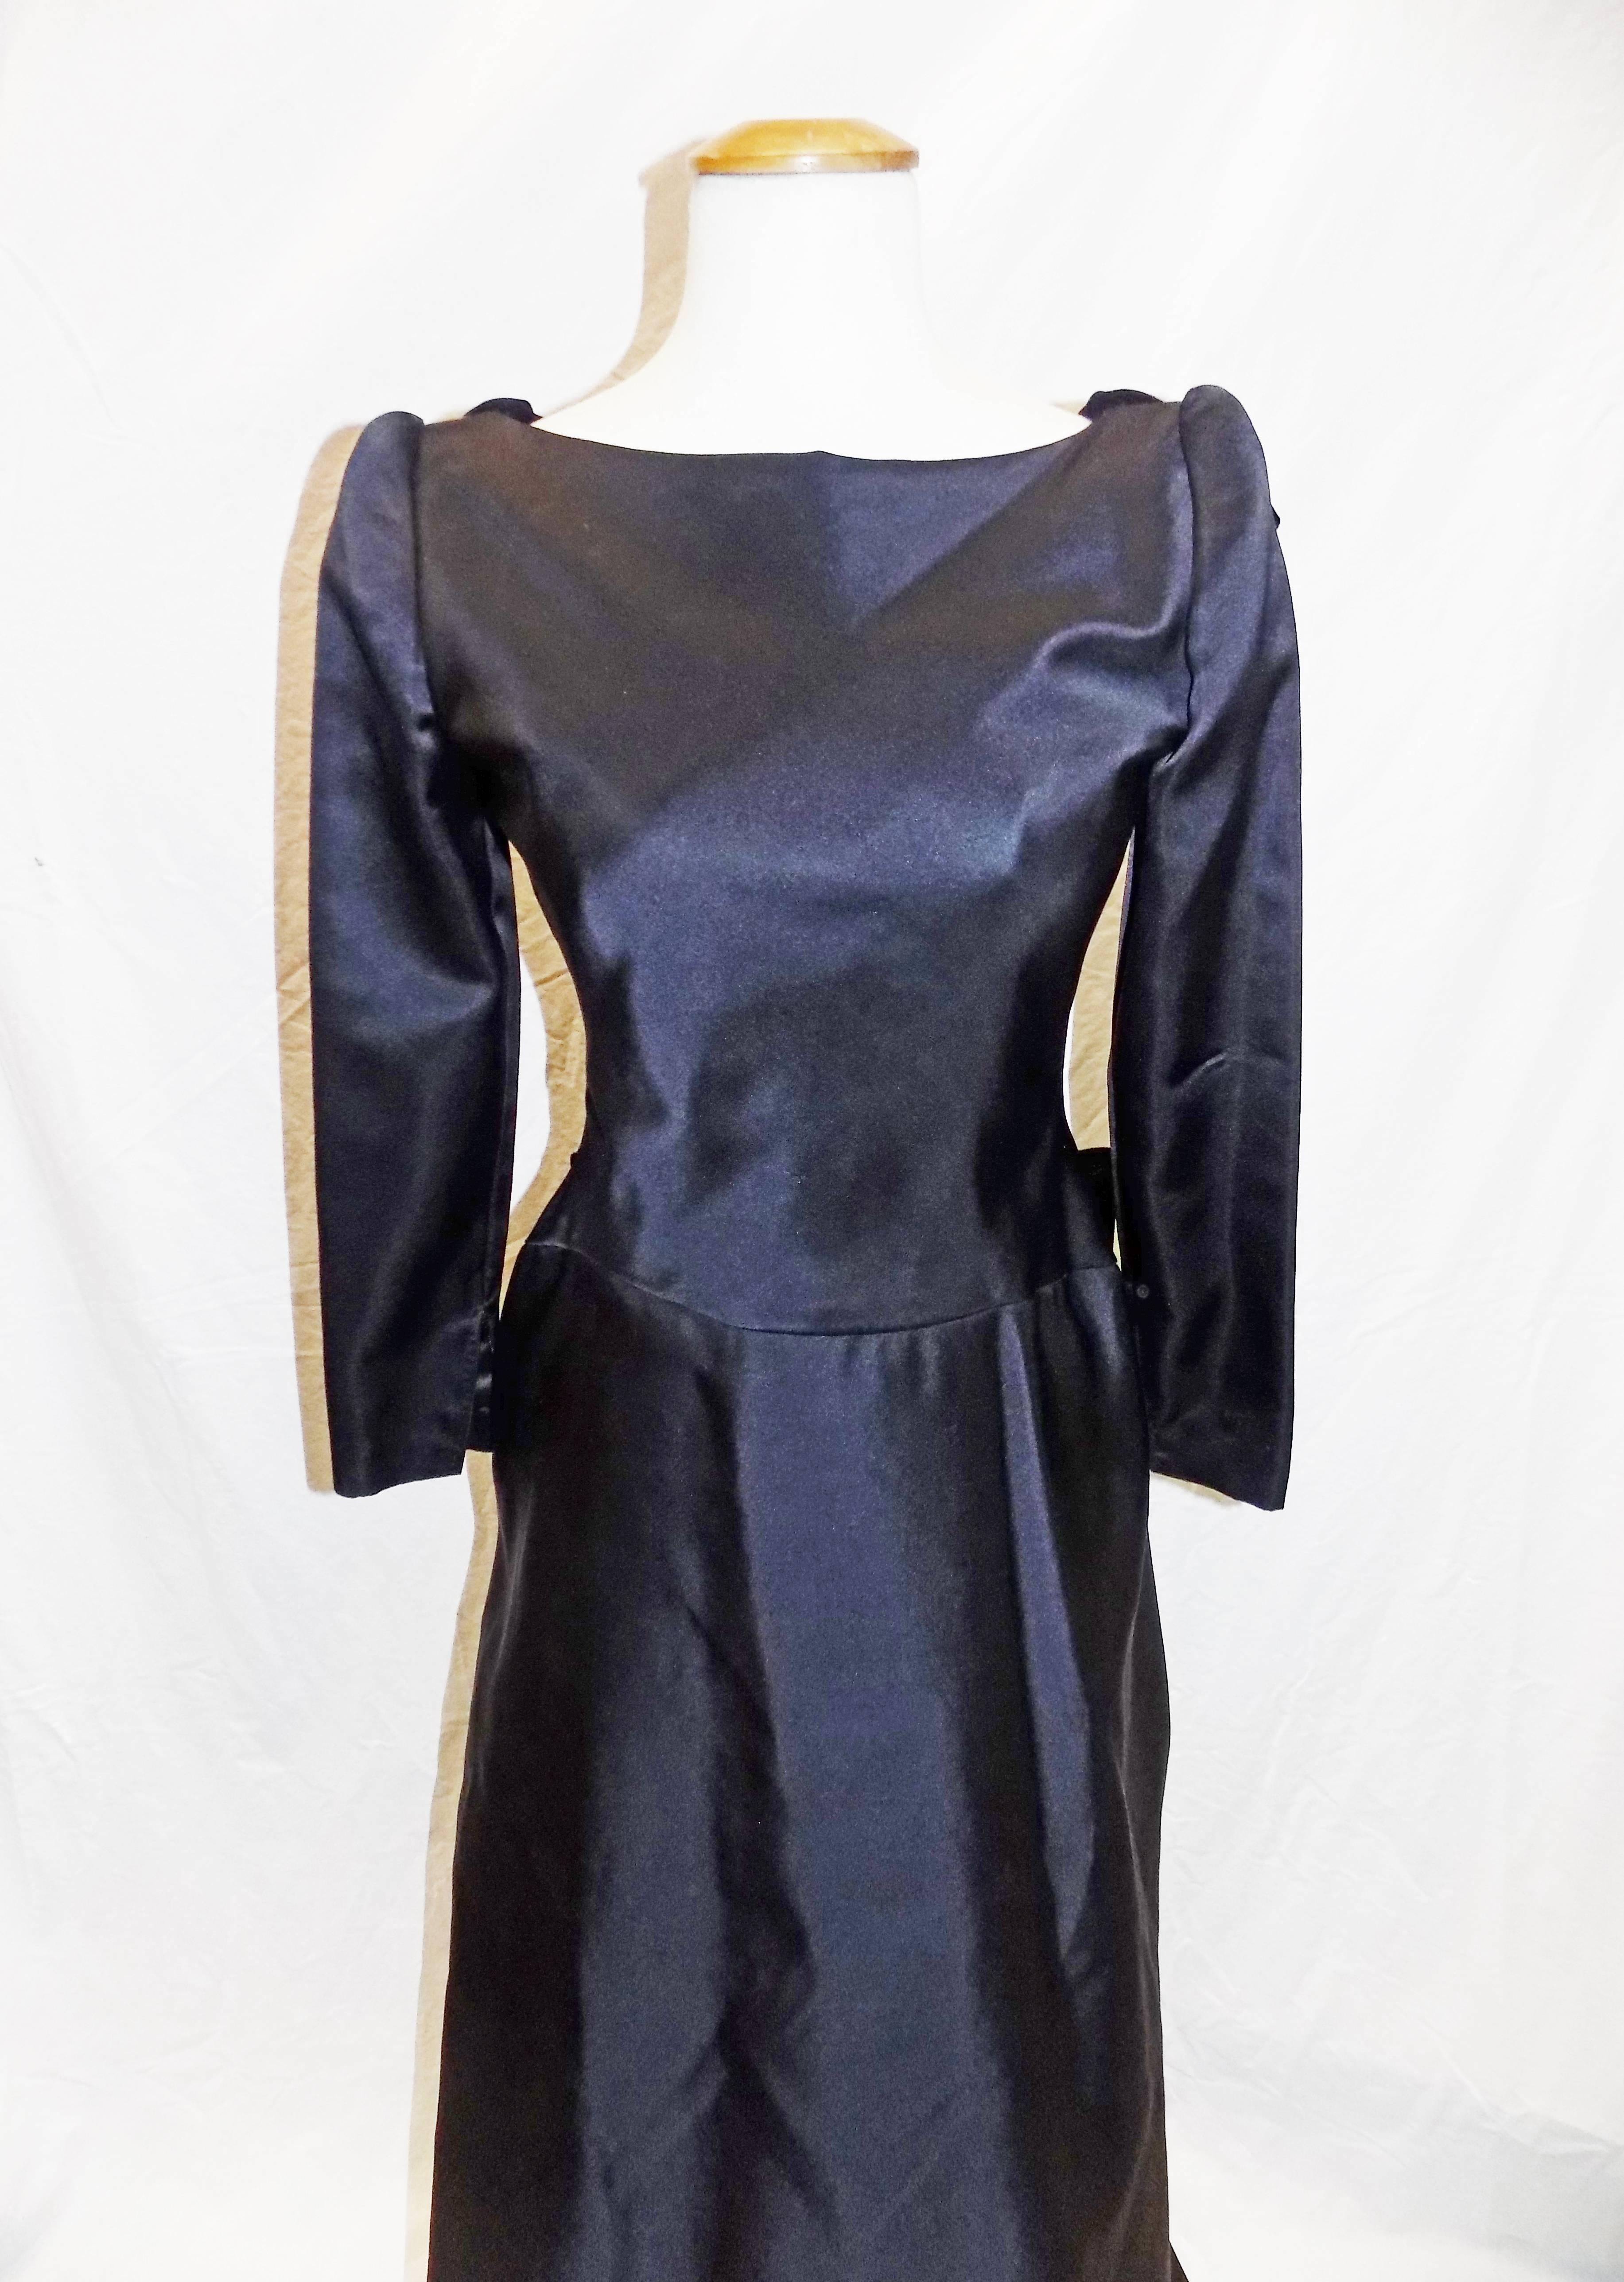 Spectacular vintage Oscar de la Renta  Black silk  satin duchess gown reminiscing 18 century. Gown features deep V back with wired 